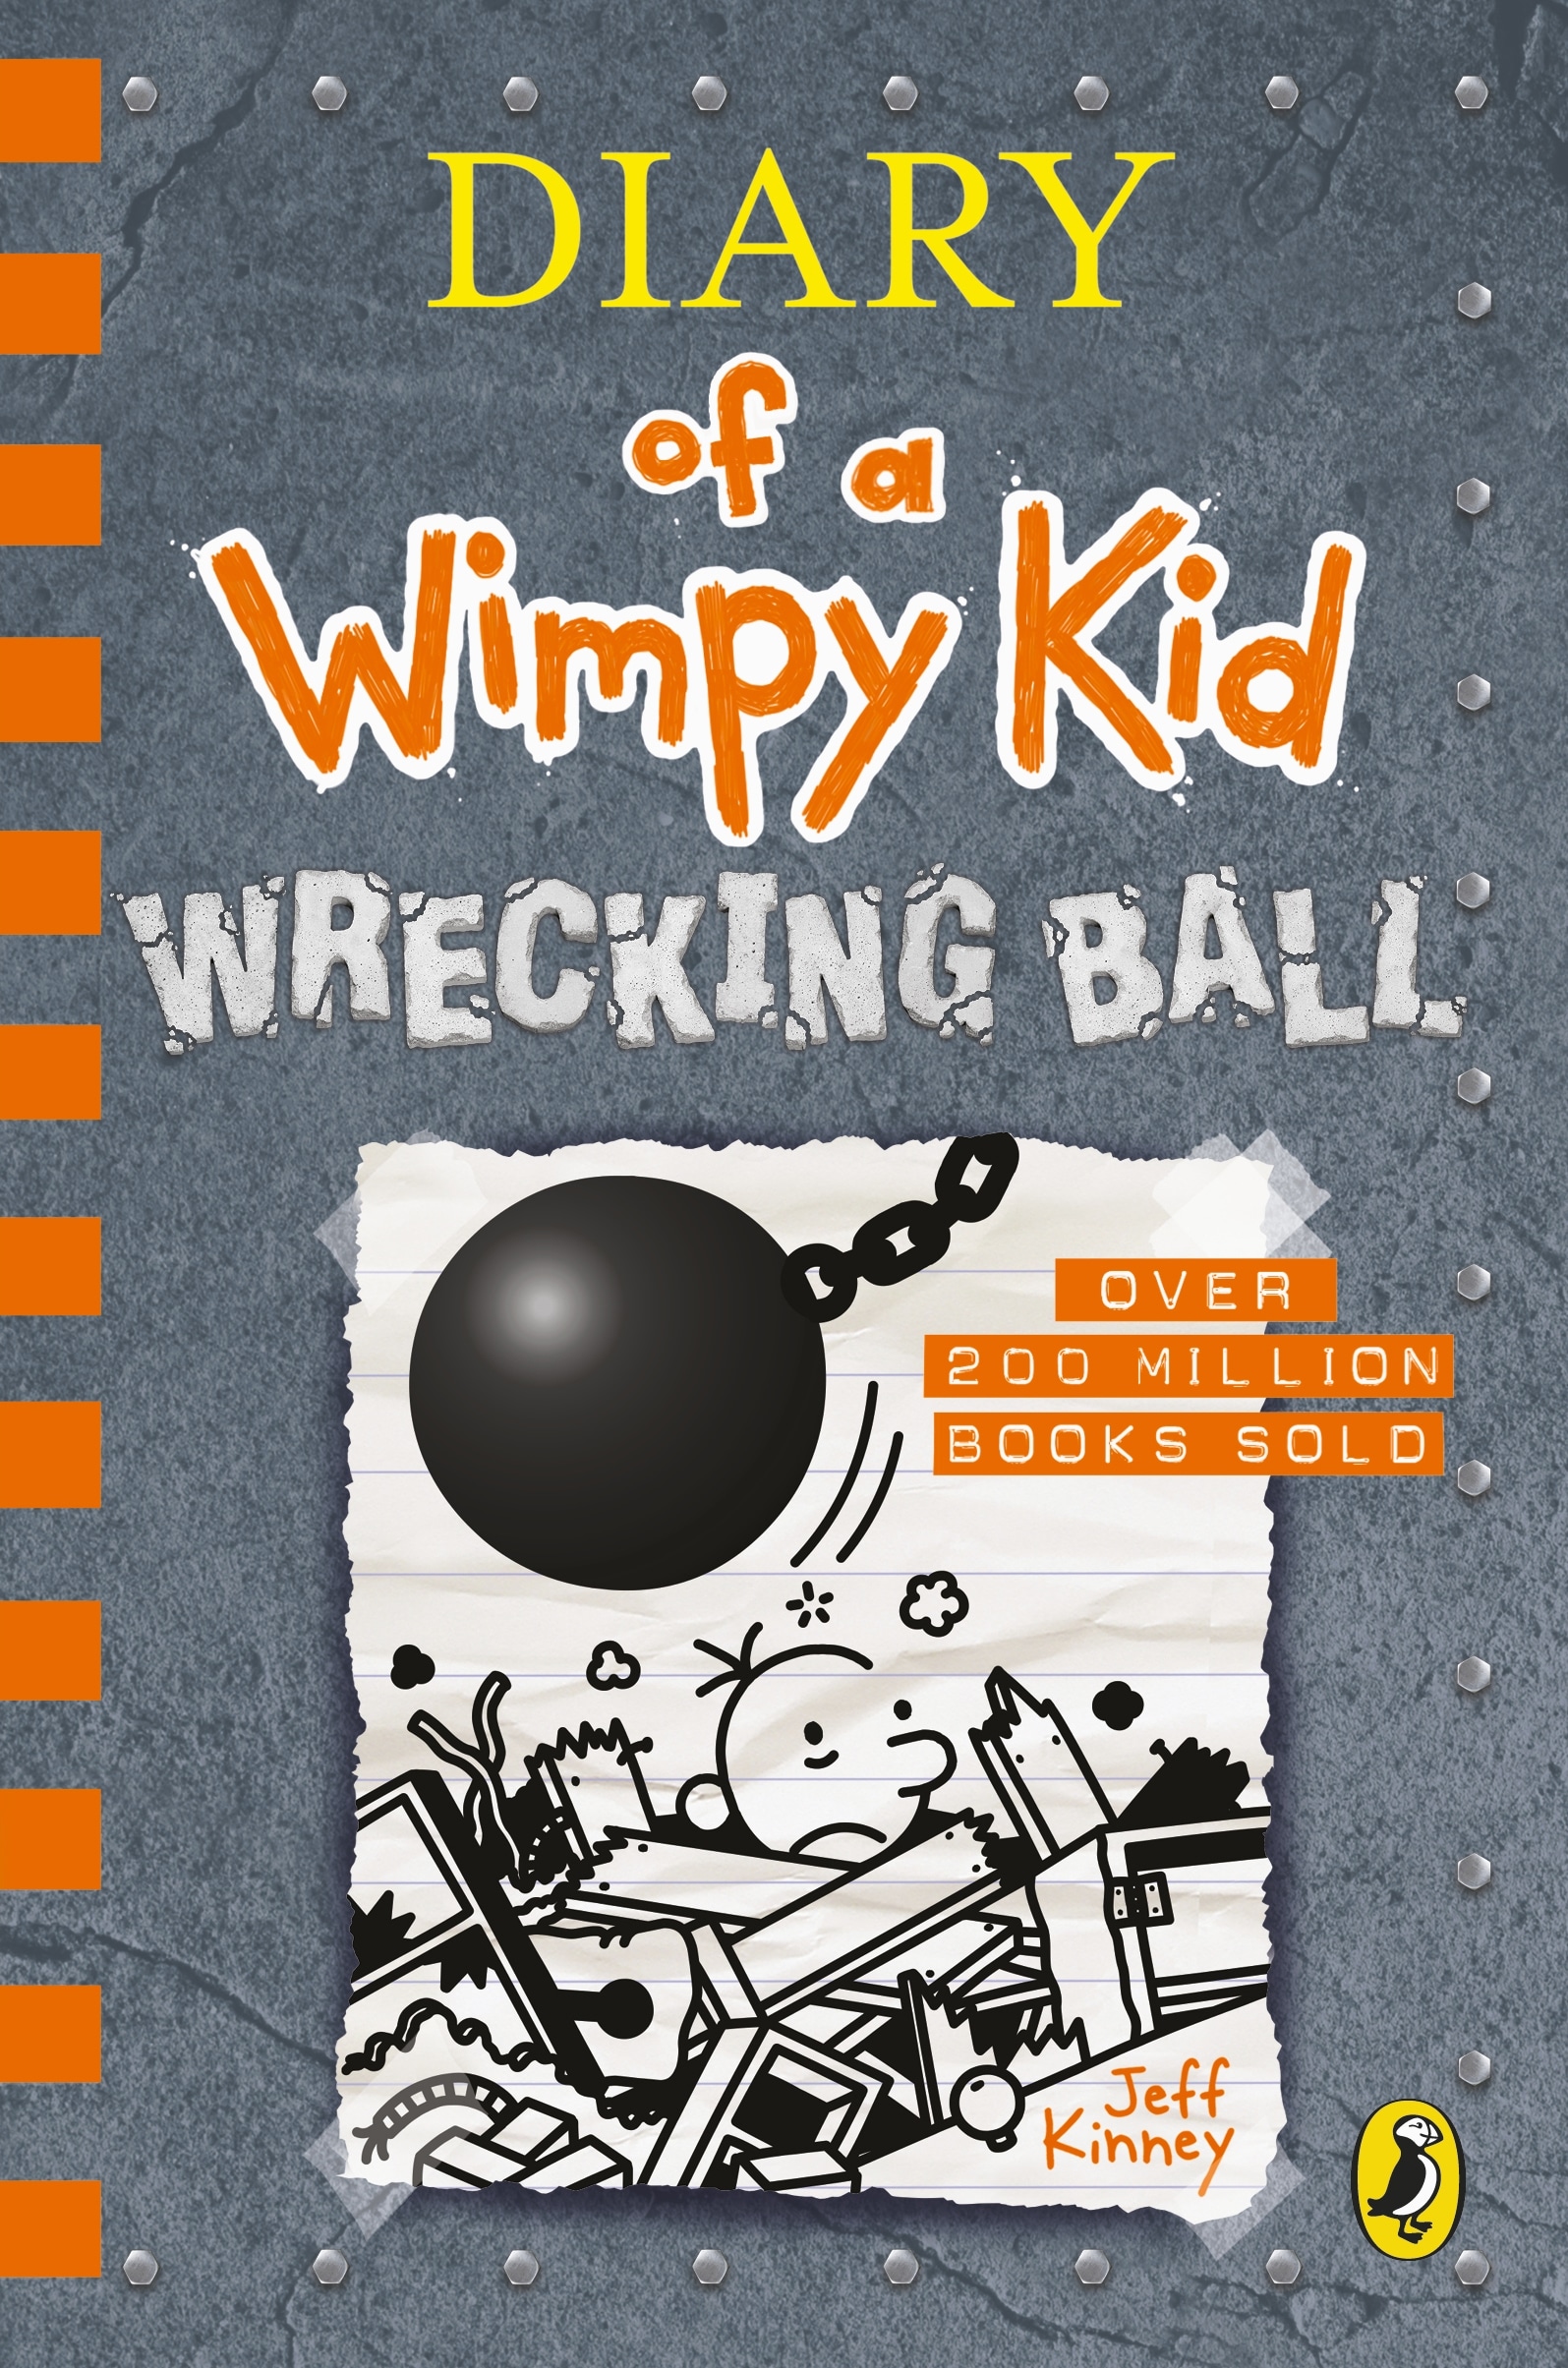 Book “Diary of a Wimpy Kid: Wrecking Ball (Book 14)” by Jeff Kinney — November 5, 2019